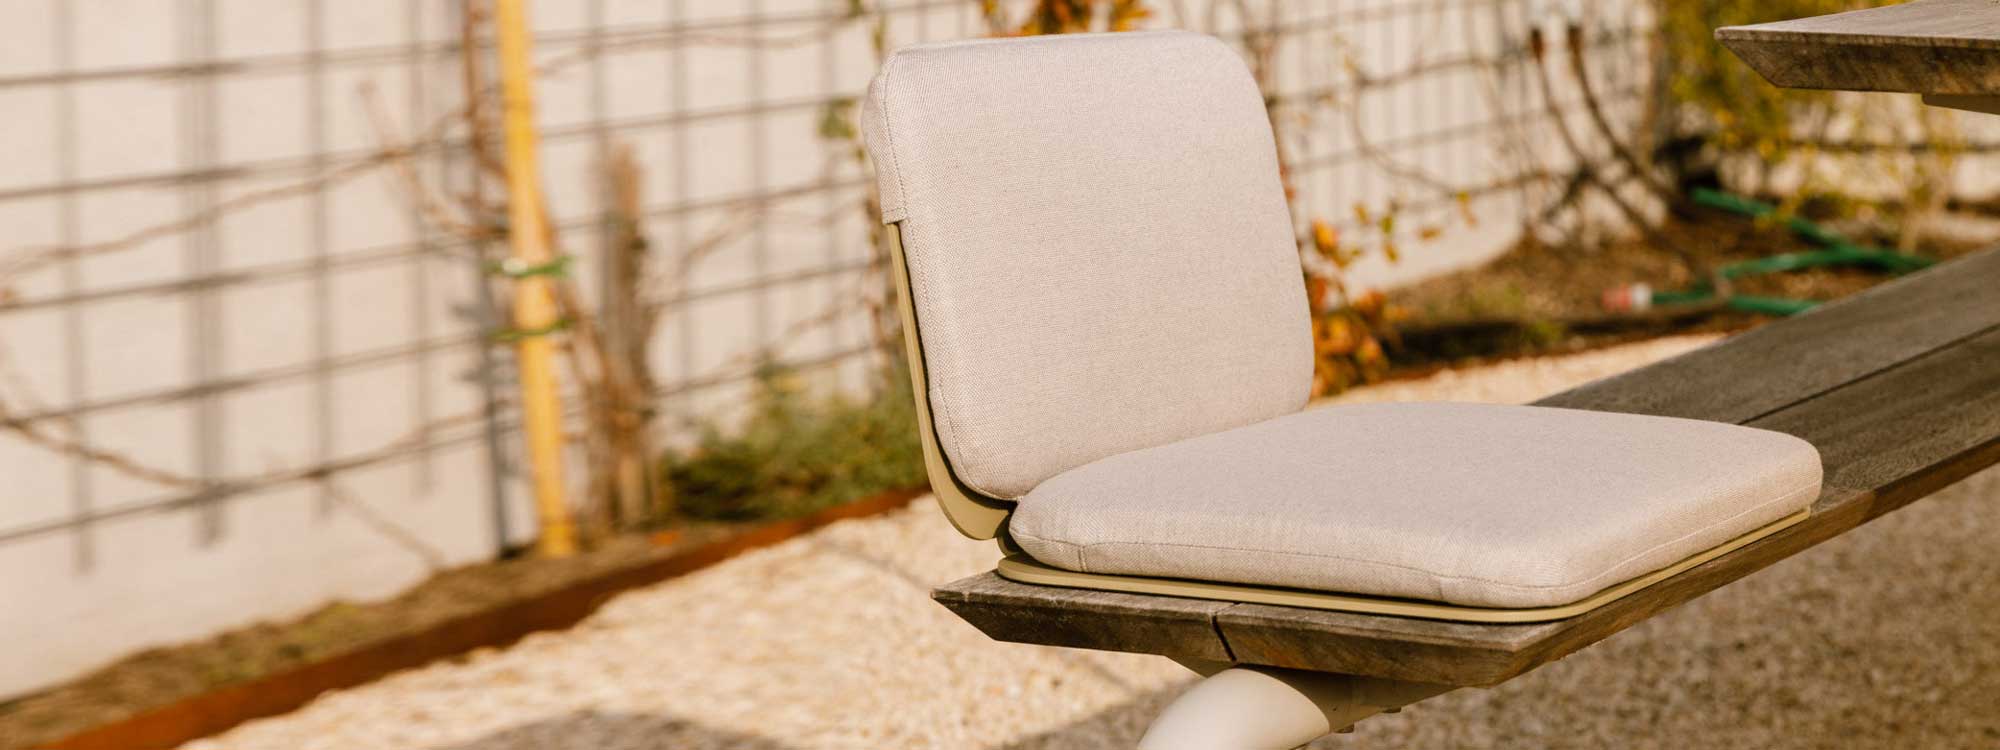 Image of The Seat which is a handy outdoor seat that fits any of Wünder's outdoor furniture